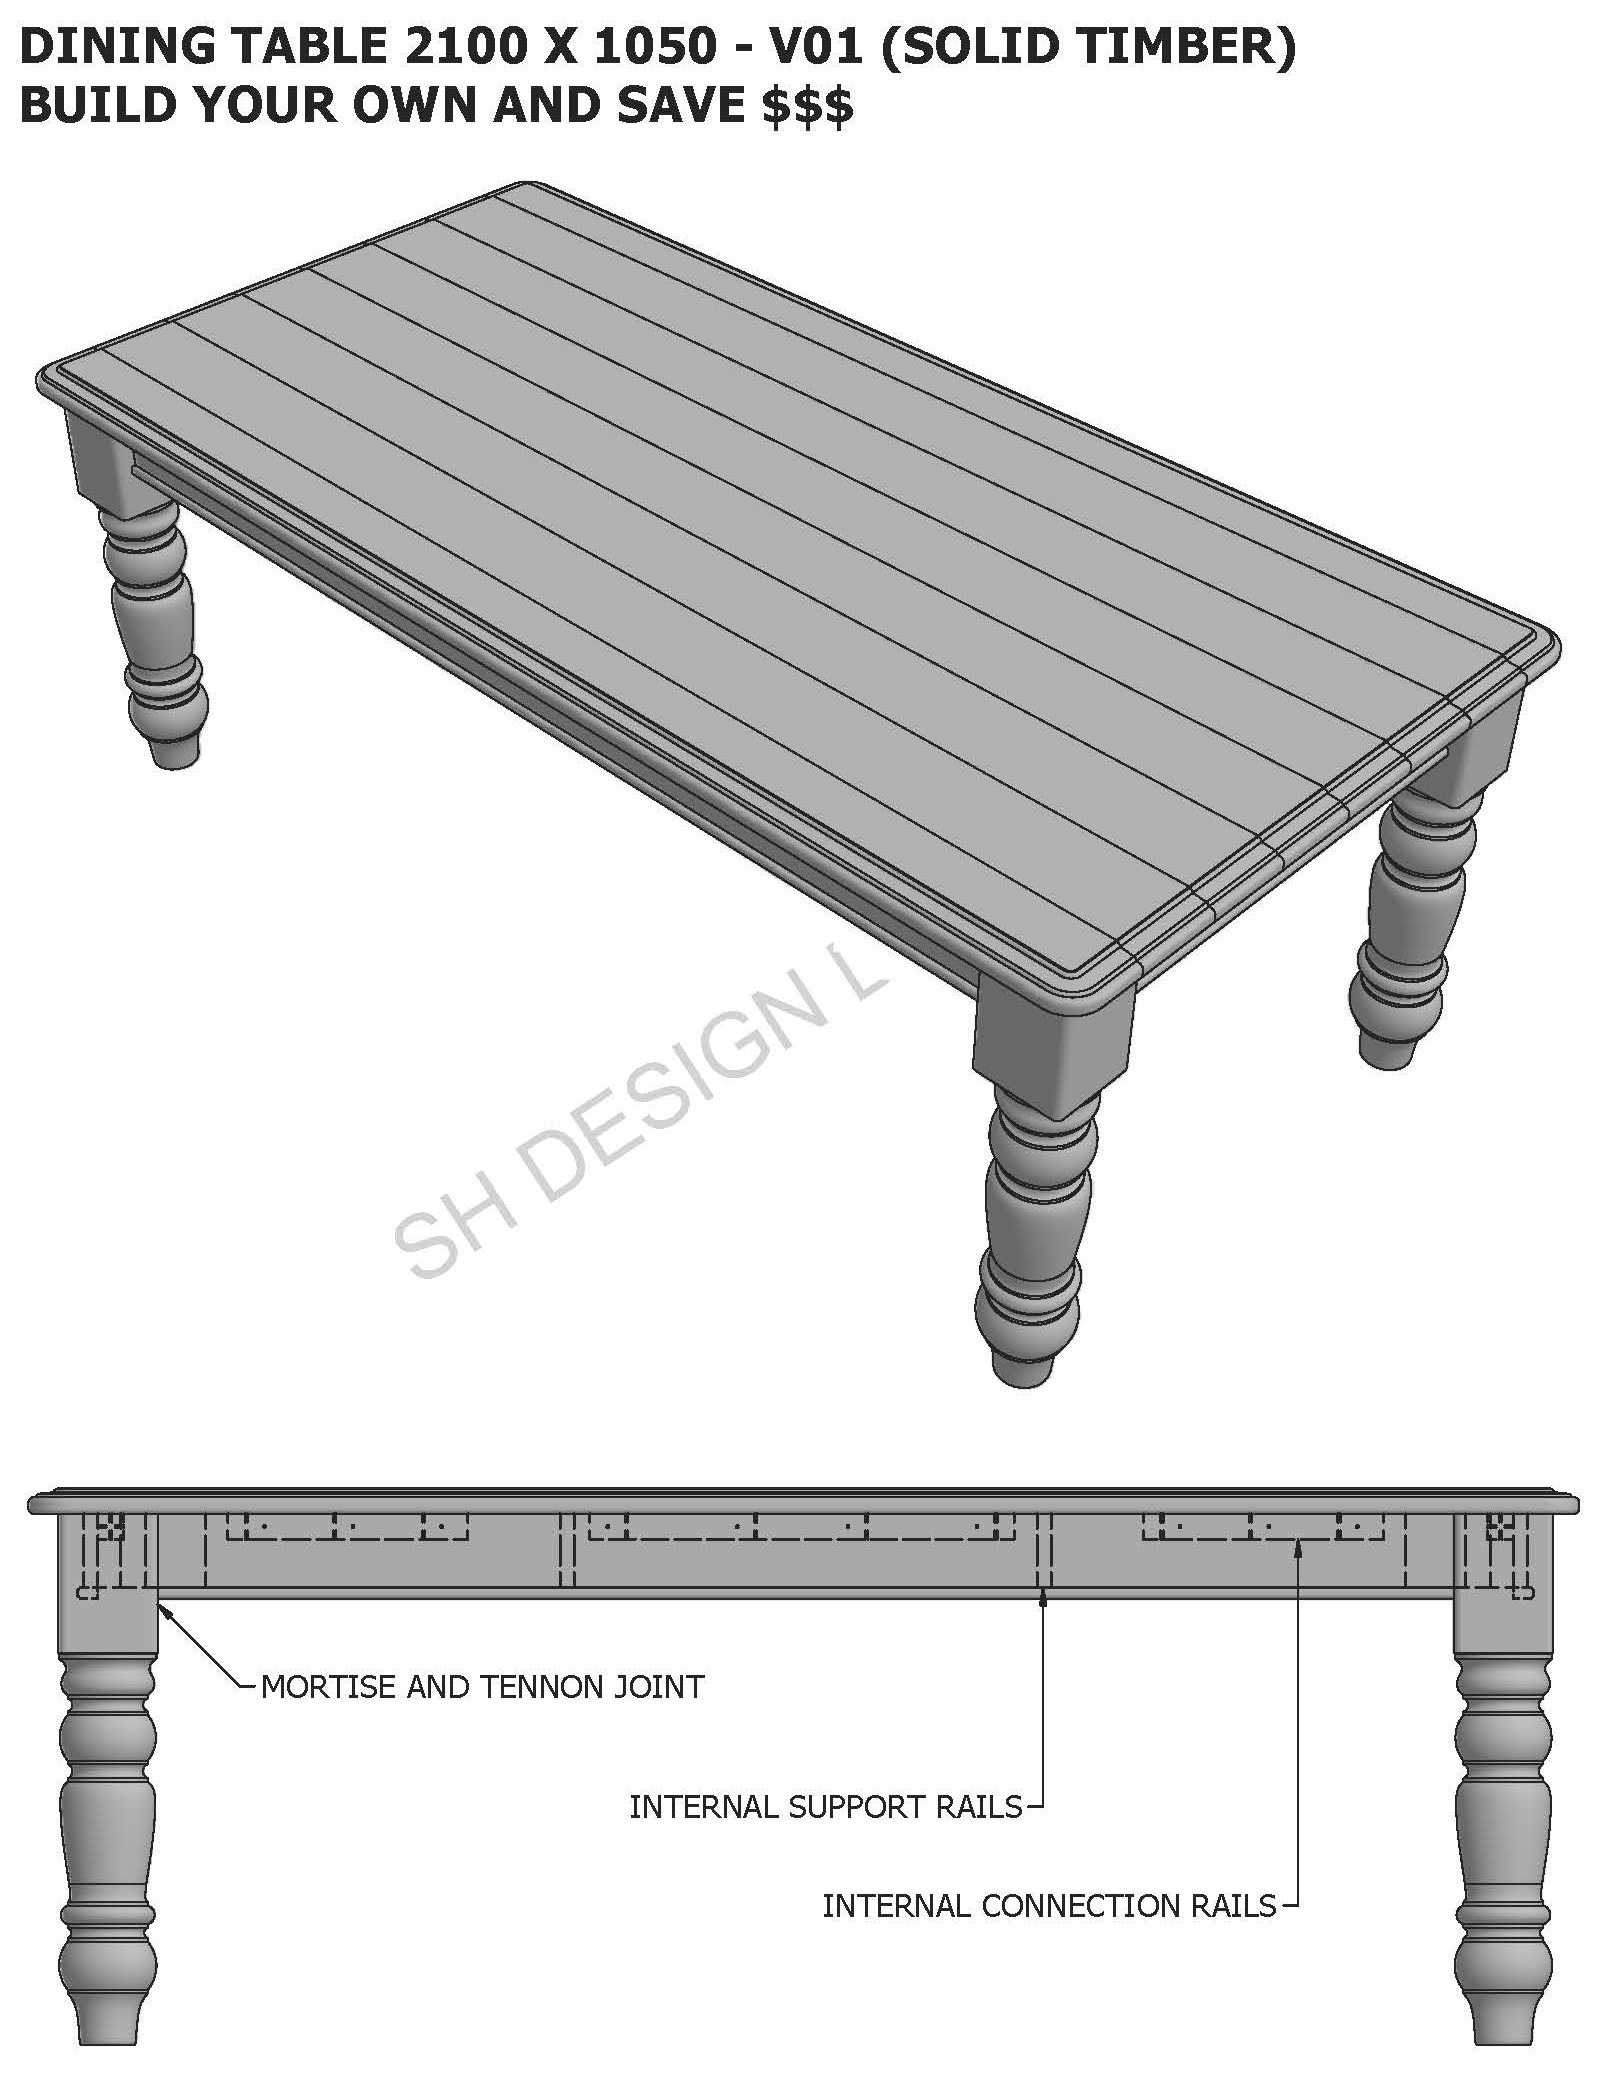 DINING TABLE V01 2100 x 1050 (82.6 x 41.3 inches)